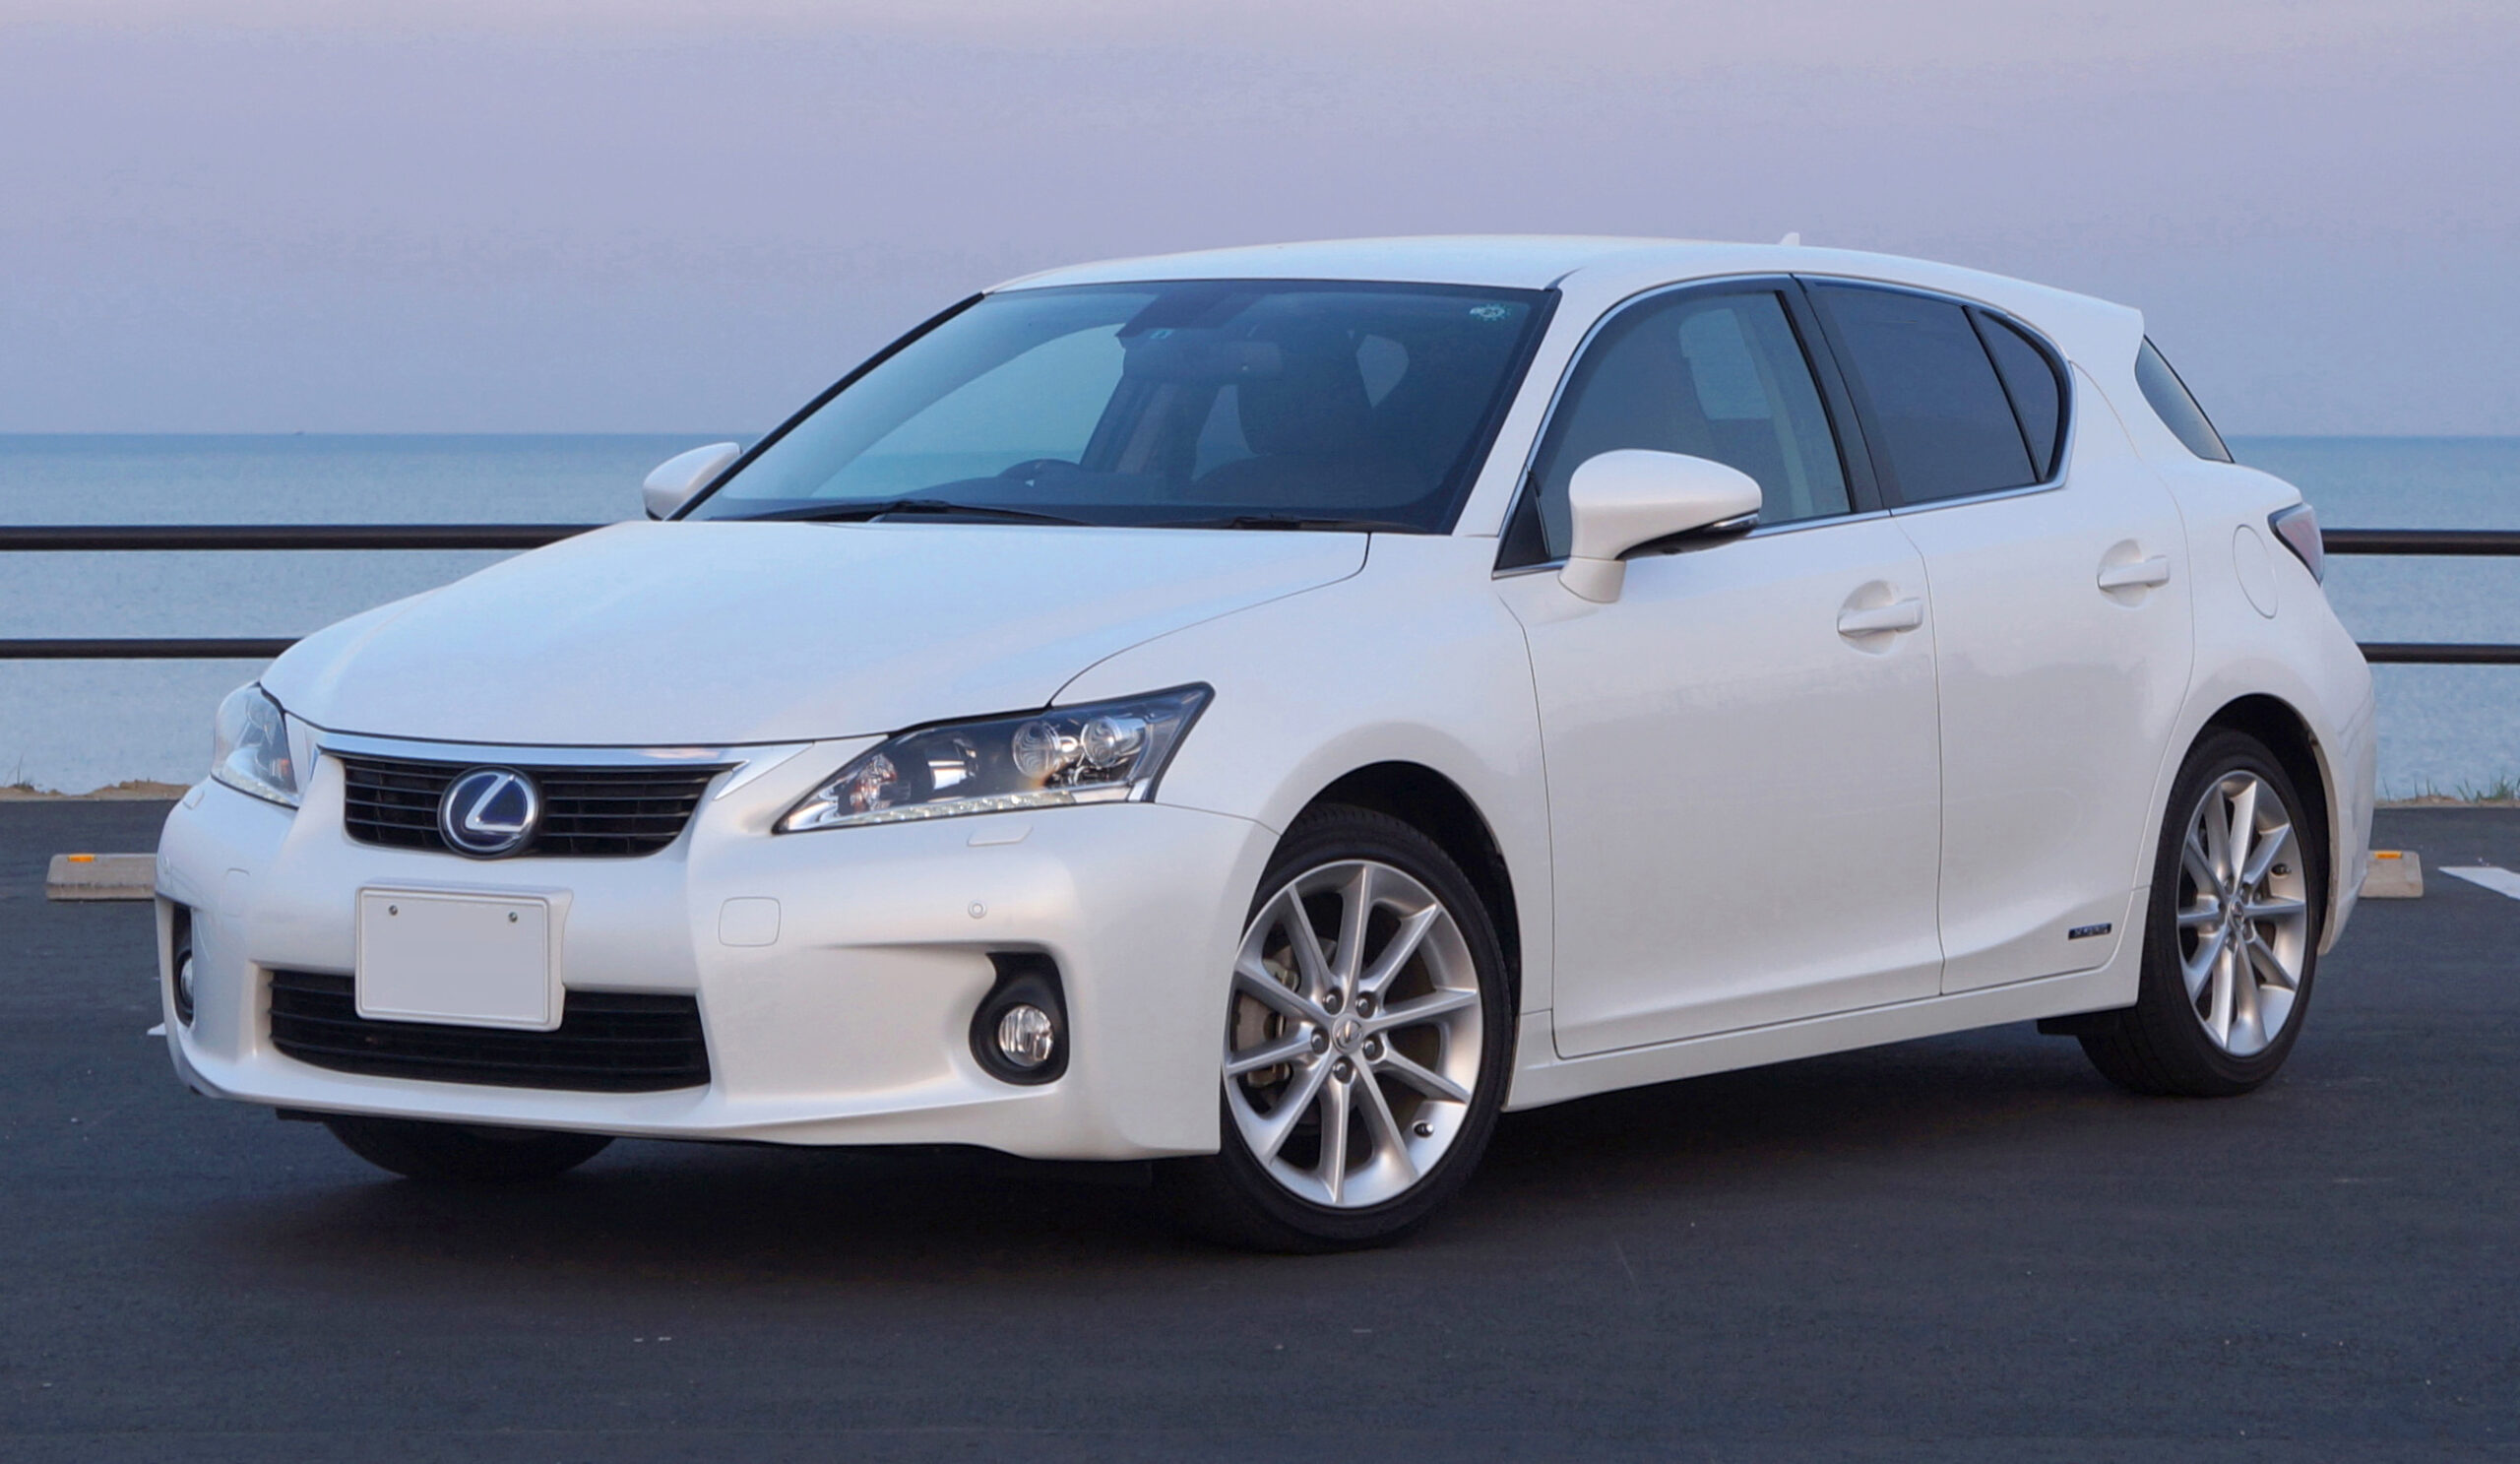 Long awaited new Lexus CT 200h, will be available in early 2011